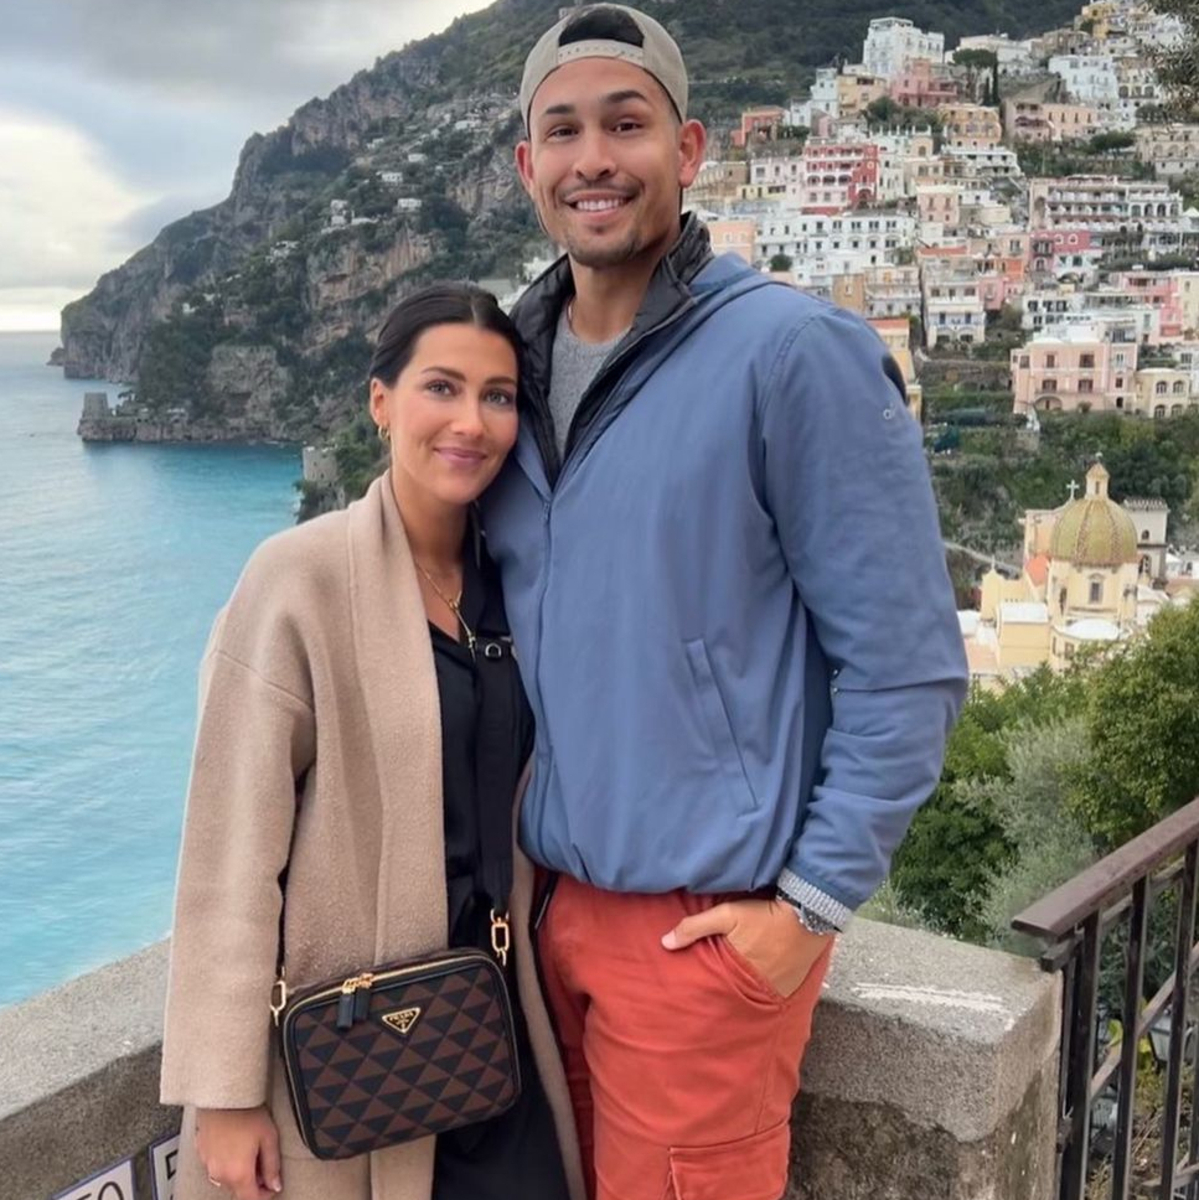 Bachelor Nation’s Becca Kufrin Expecting First Baby With Thomas Jacob